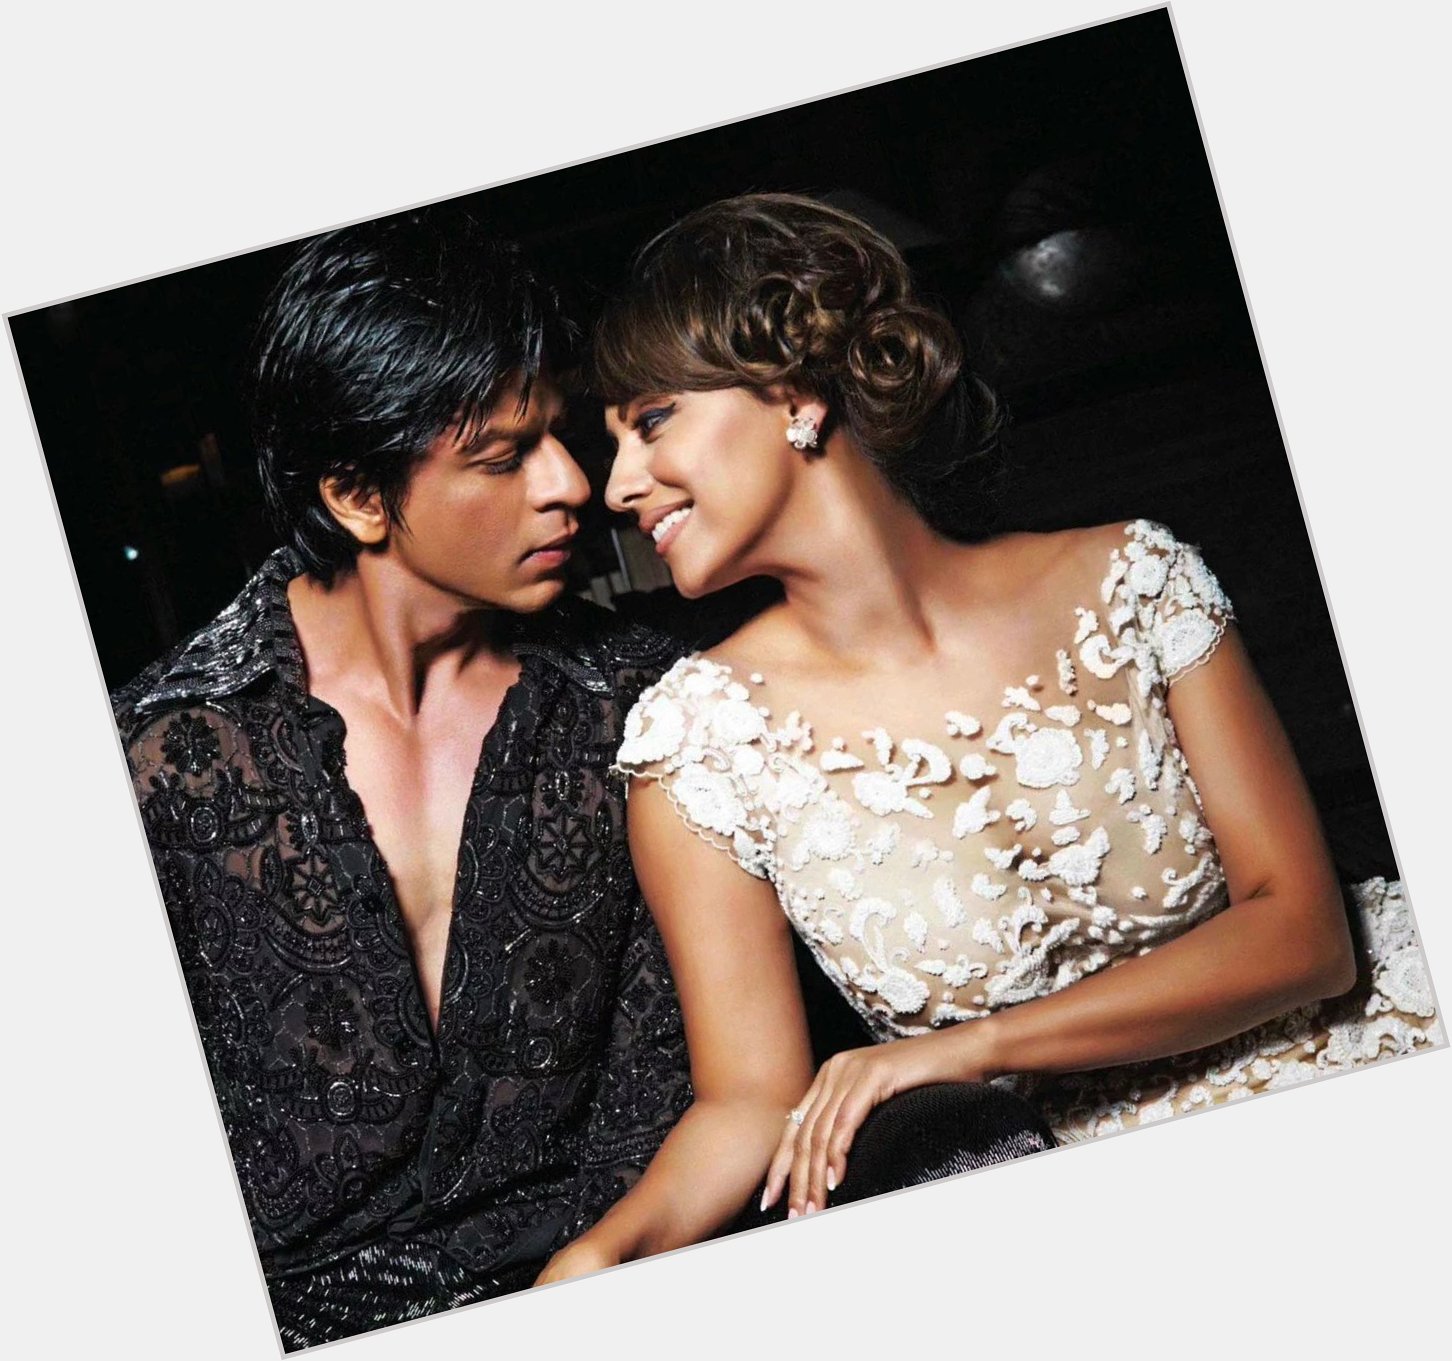 Happy birthday to the wife of King Khan, Gauri Khan! Wish you two can grow old together  